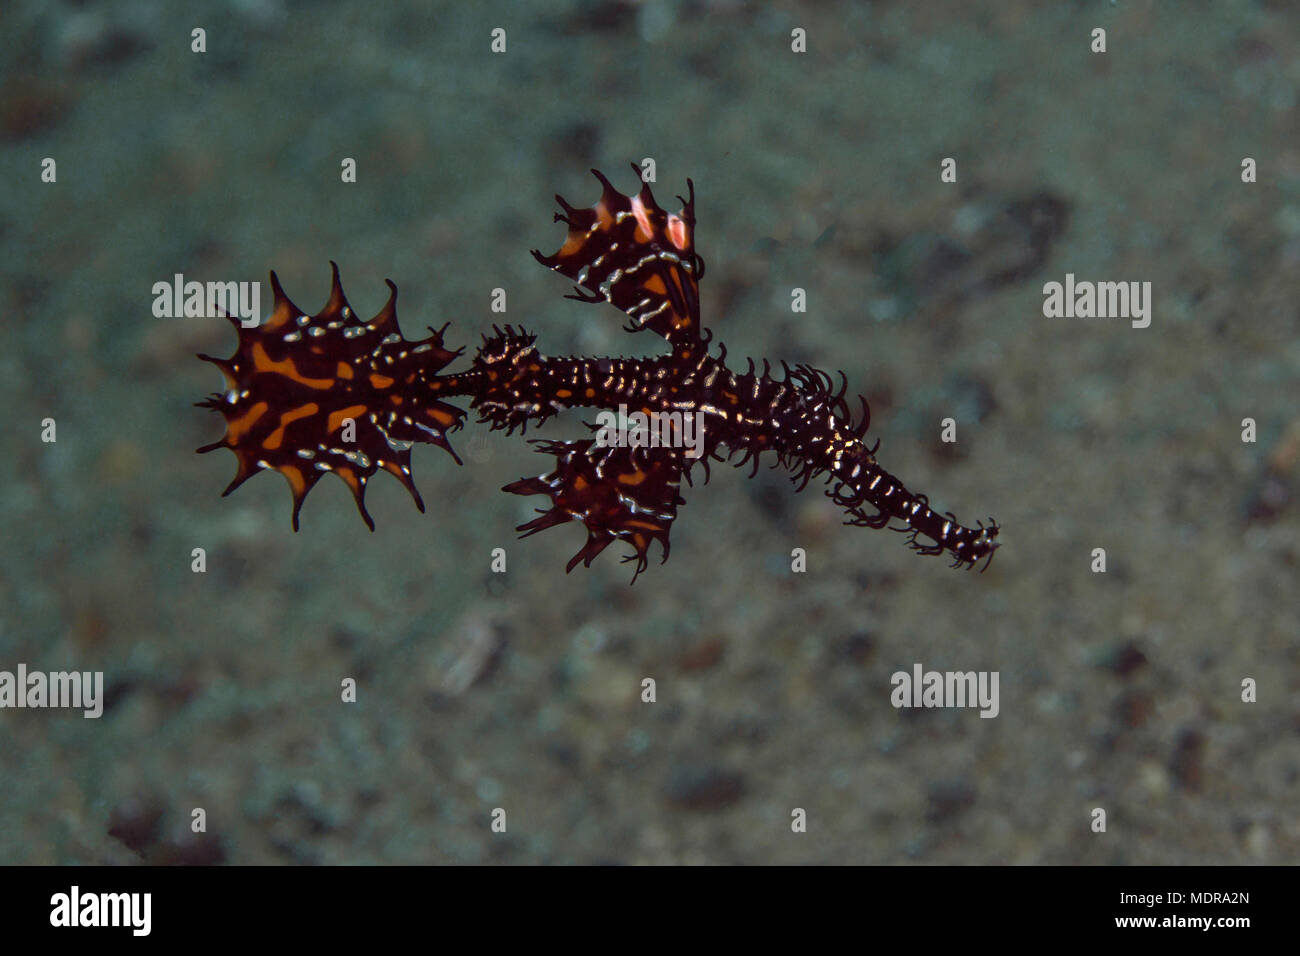 Harlequin ghost pipefish (Solenostomus paradoxus). Picture was taken in the Banda sea, Ambon, West Papua, Indonesia Stock Photo